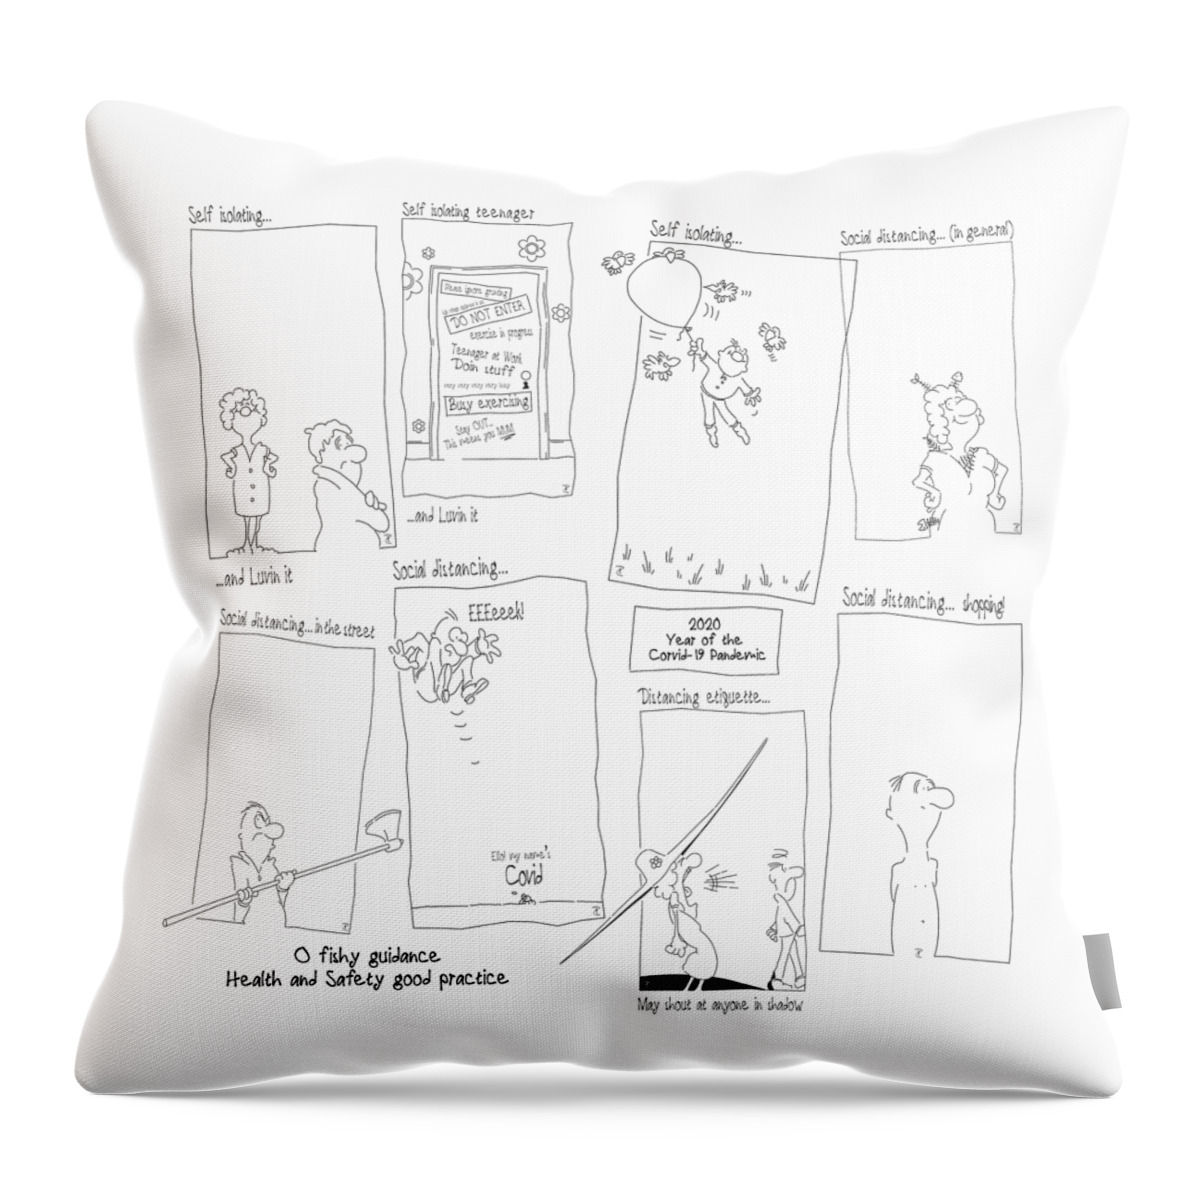 Pandemic Throw Pillow featuring the drawing All eight of the OFishy PANDEMIC guidelines by Paul Davenport